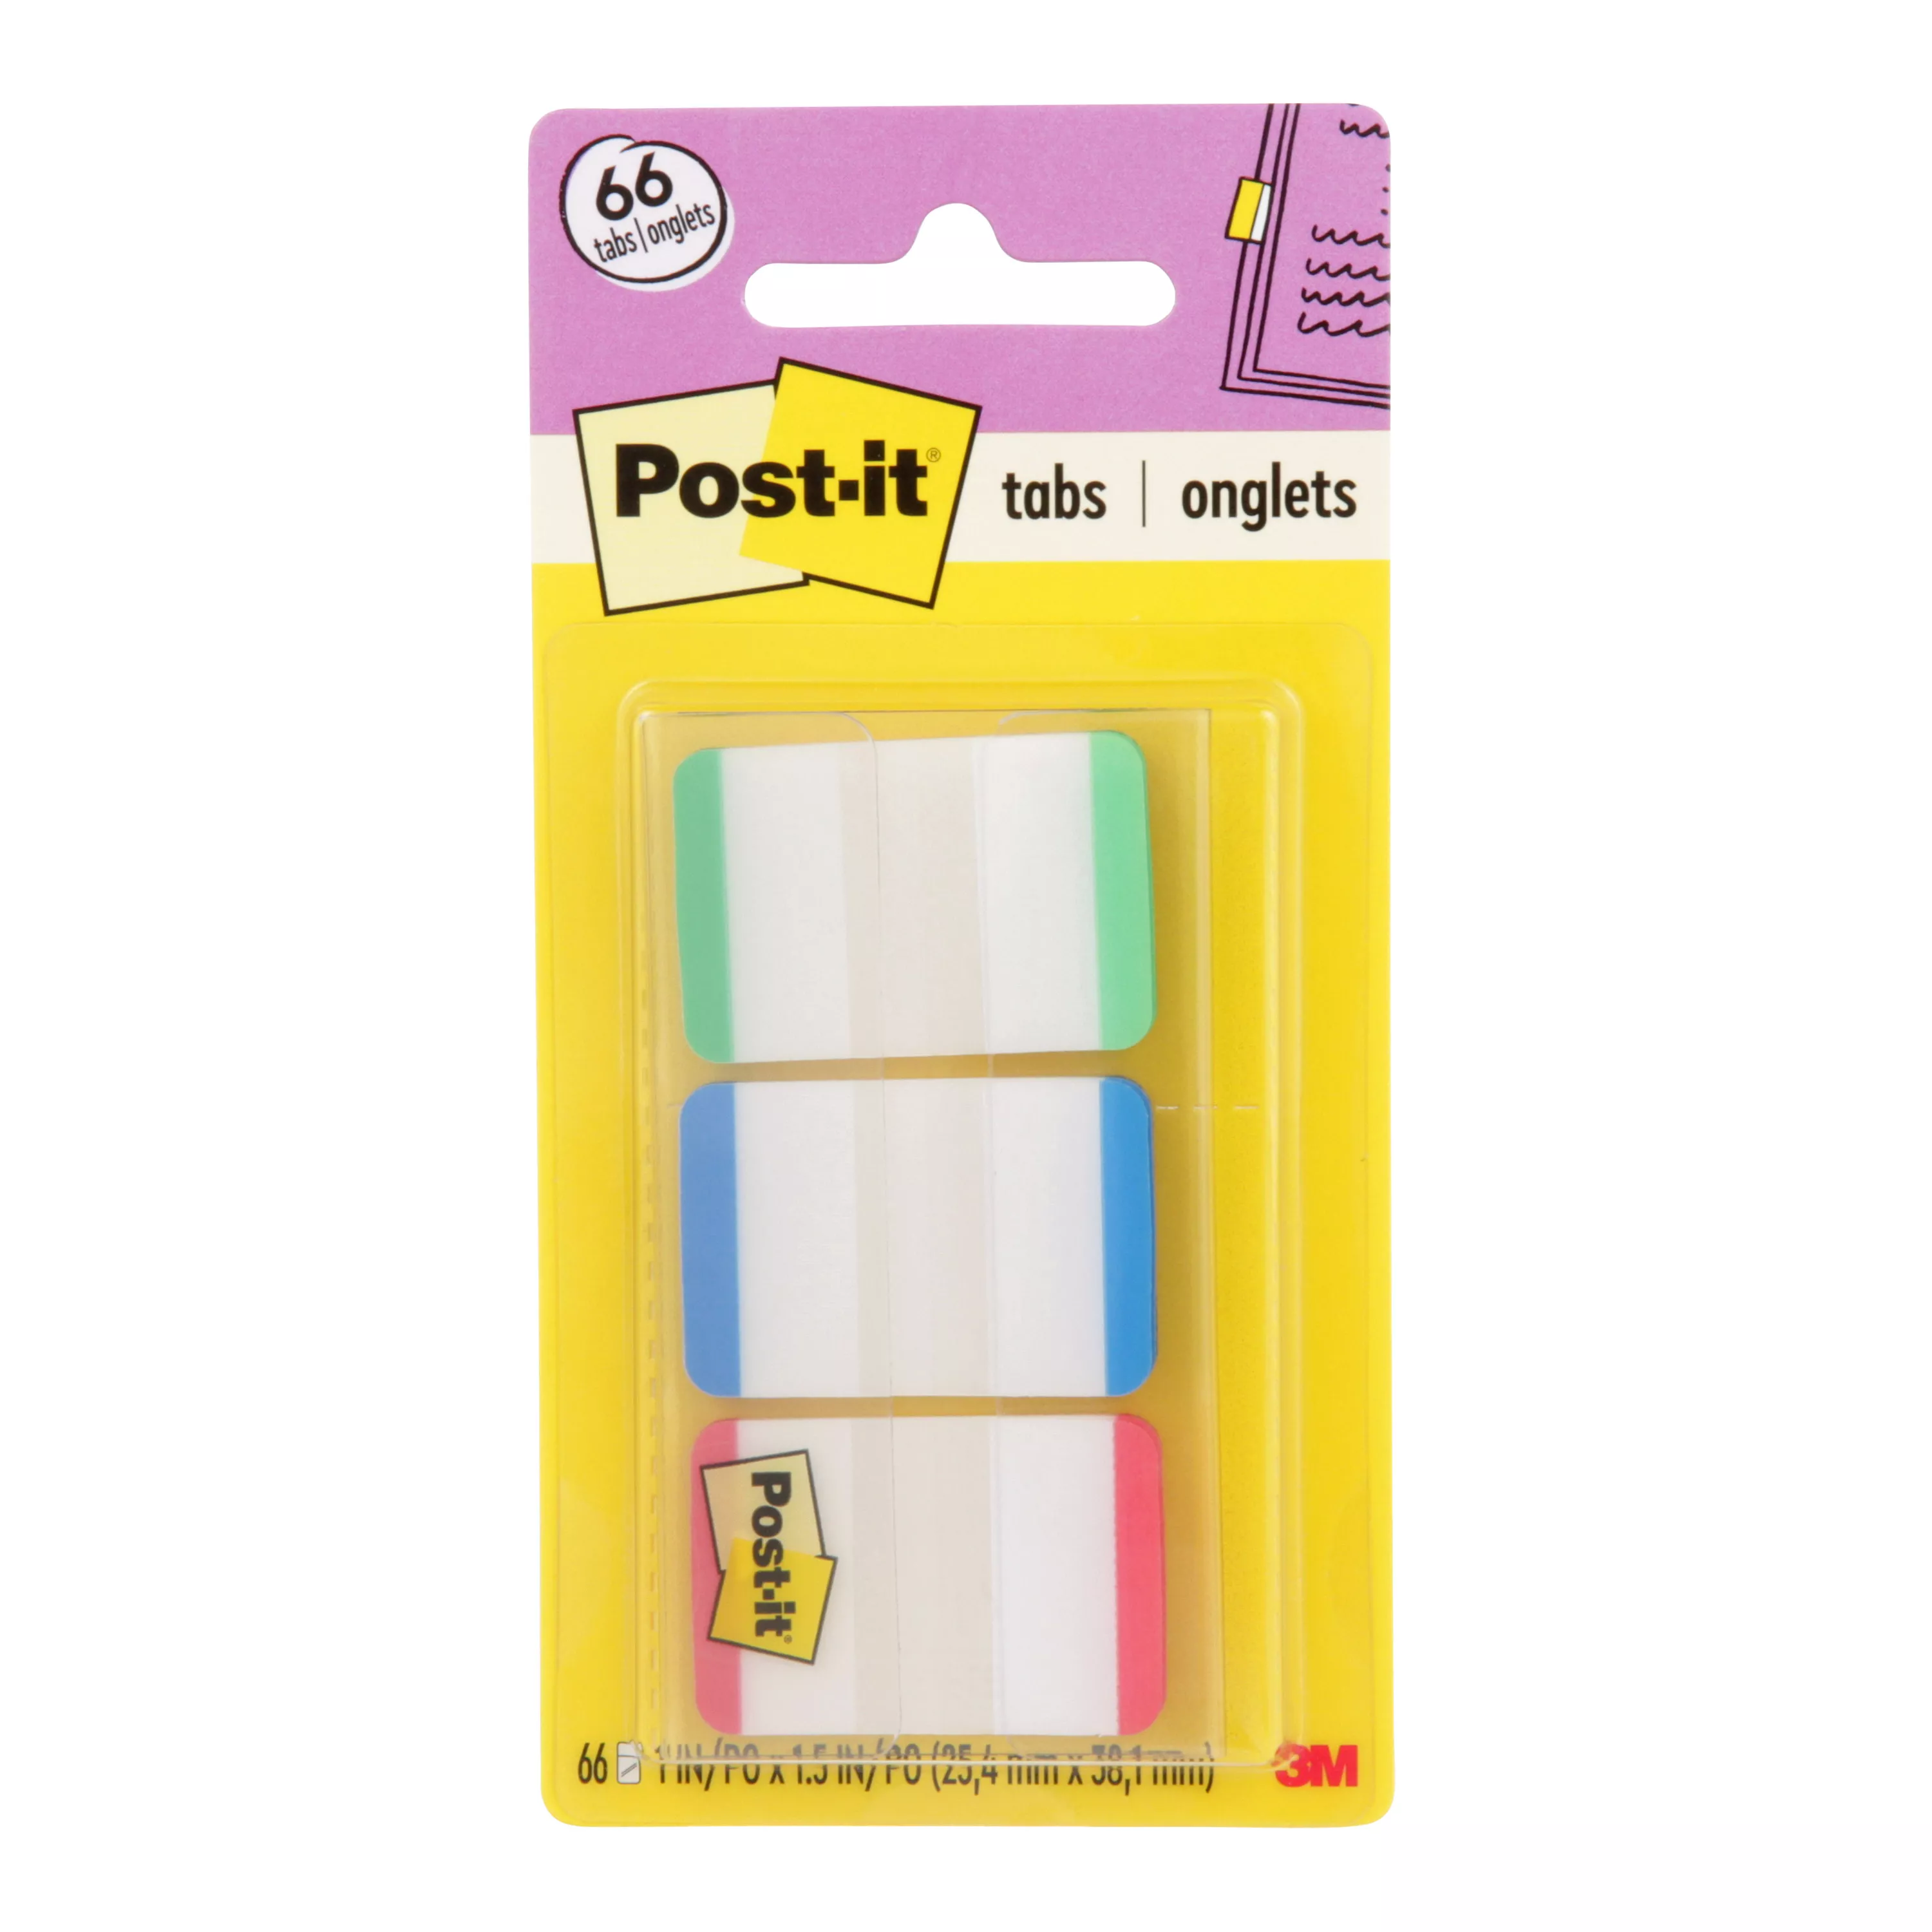 Post-it® Durable Tabs 686L-GBR, 1 in. x 1.5 in. Green, Blue, Red 22 Tabs
Pad